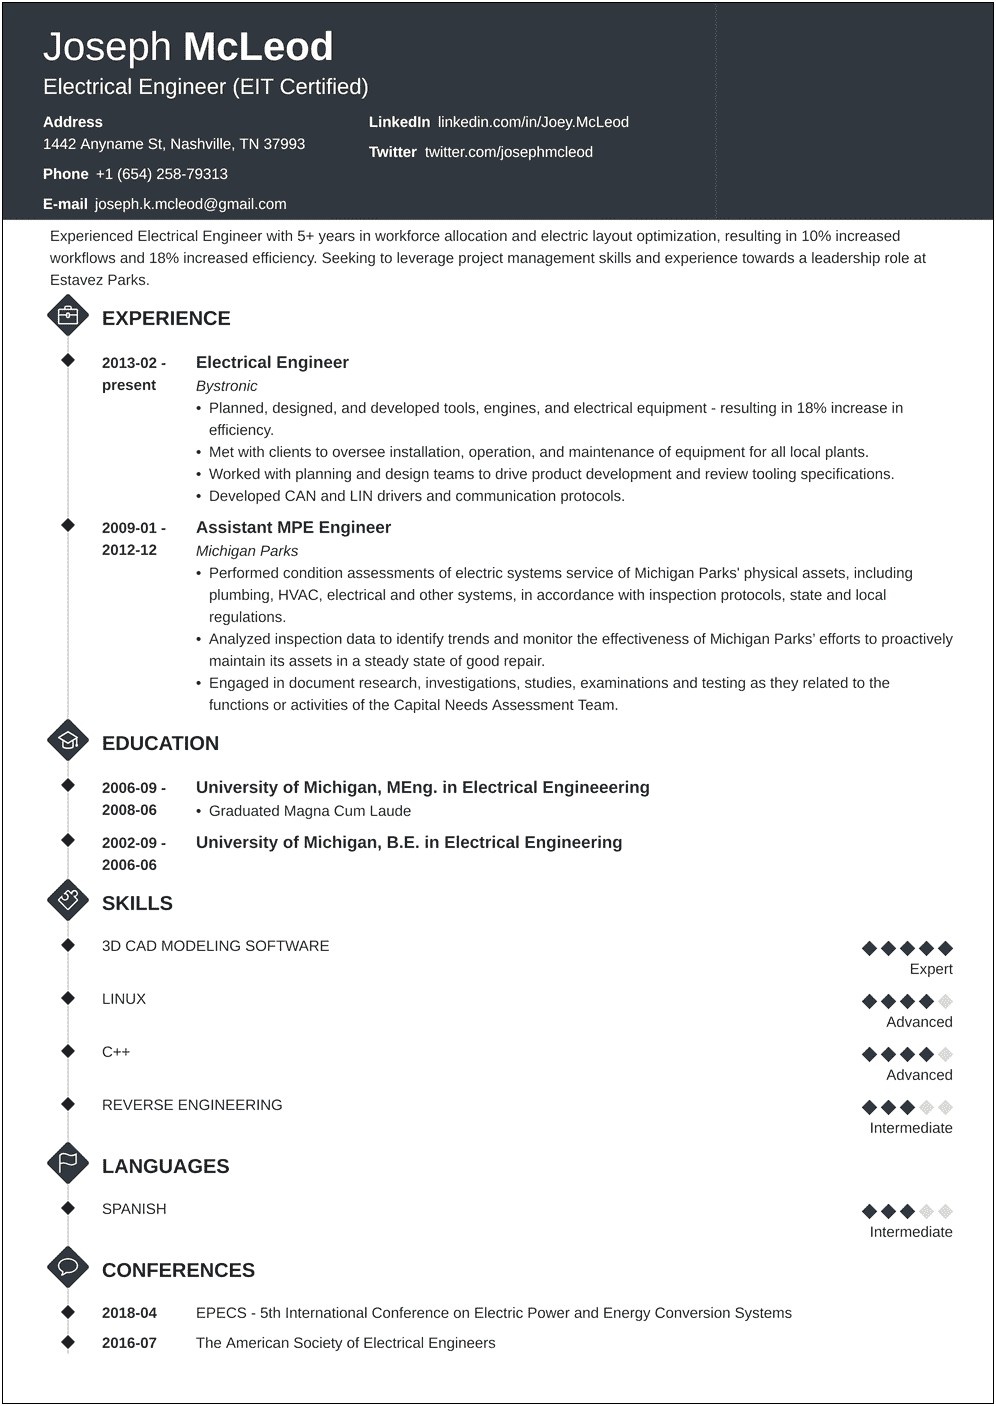 Resume Format For Electronics Engineers Free Download